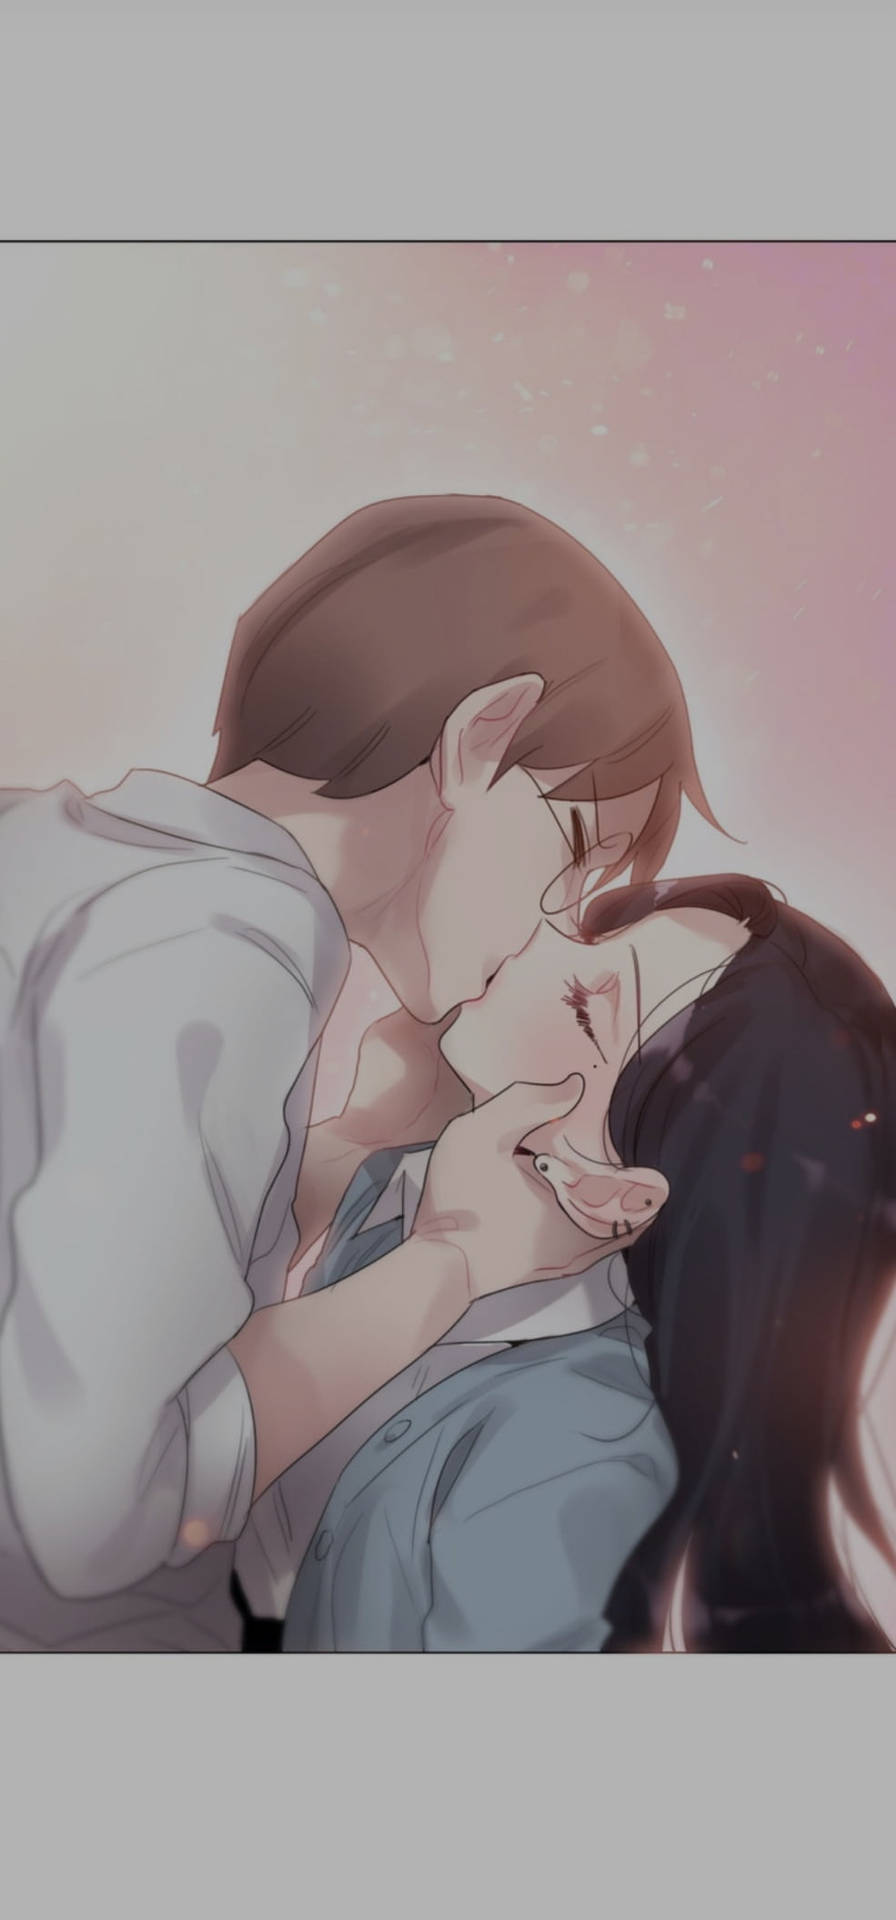 Download Passionate Anime Couple Kiss Phone Wallpaper 